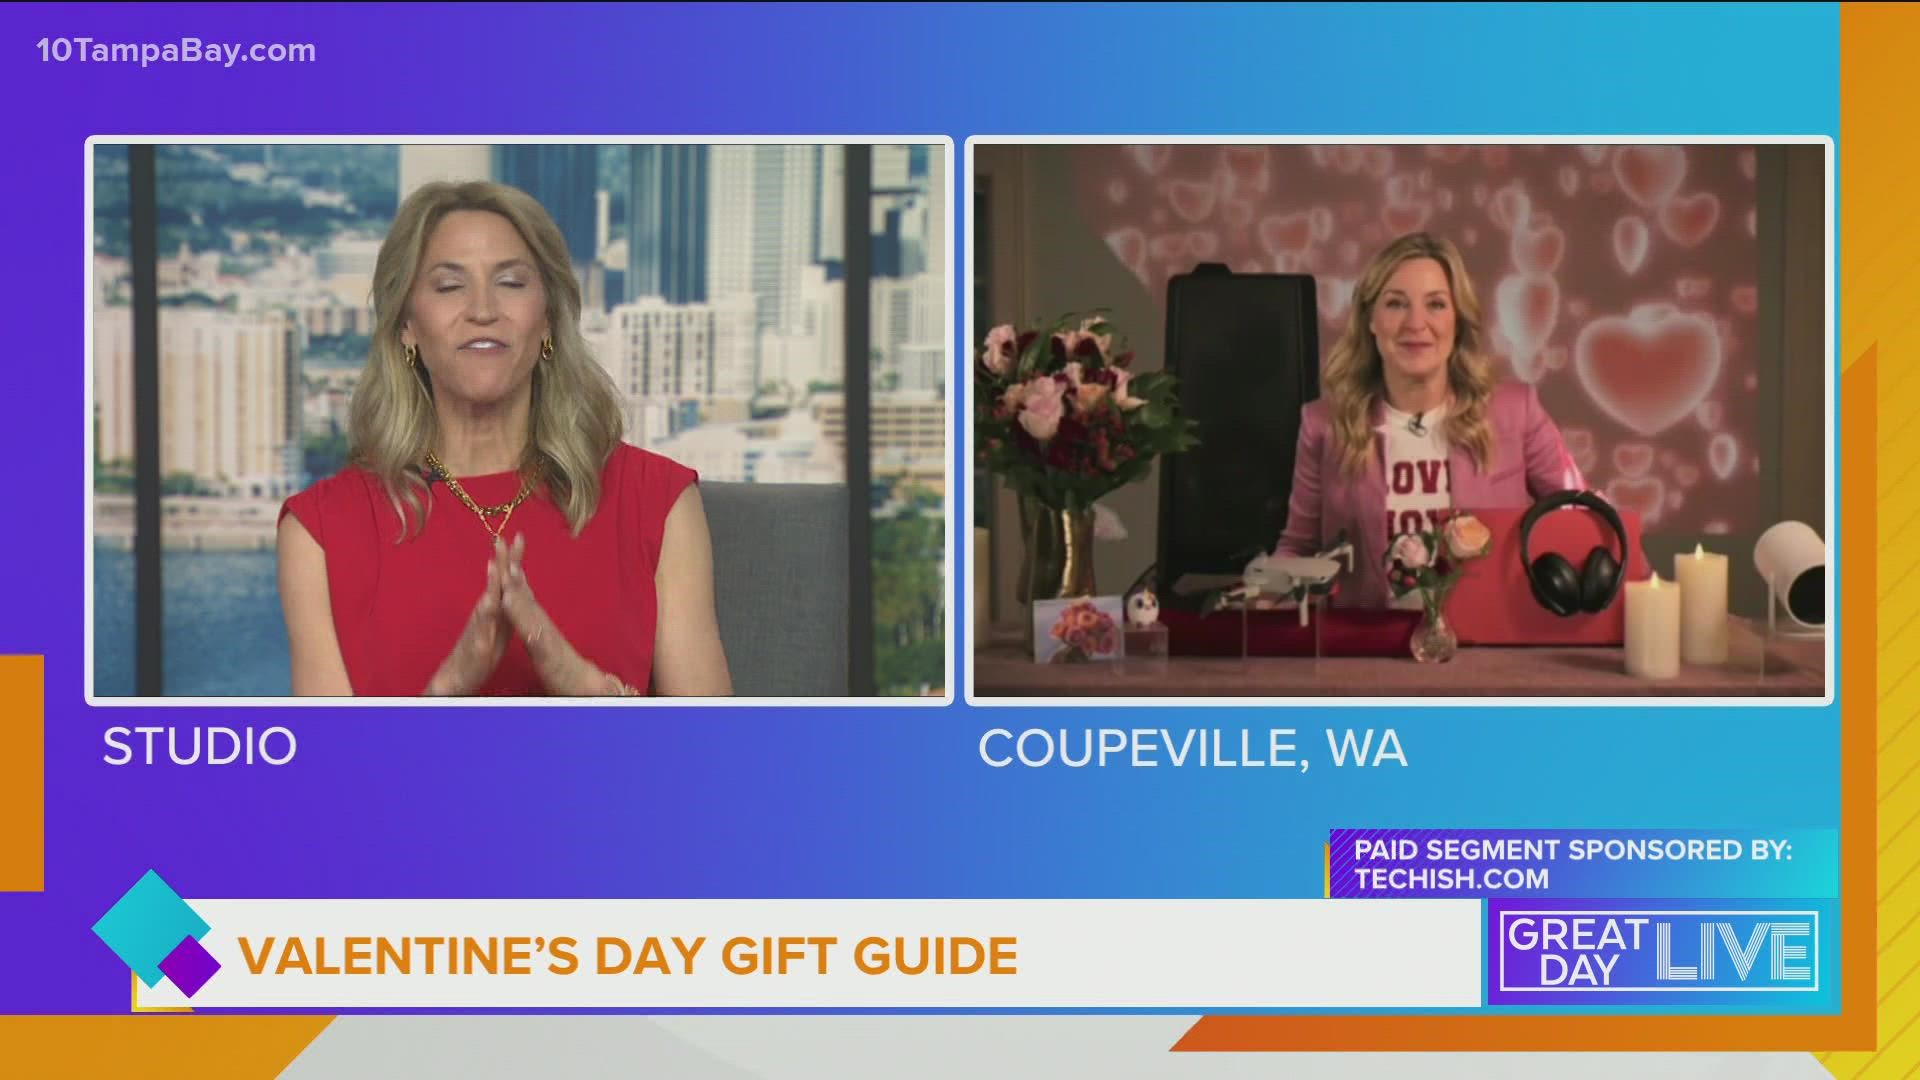 Jennifer Jolly has great picks if you don't know what to buy your valentined. Segment sponsored by Techish.com